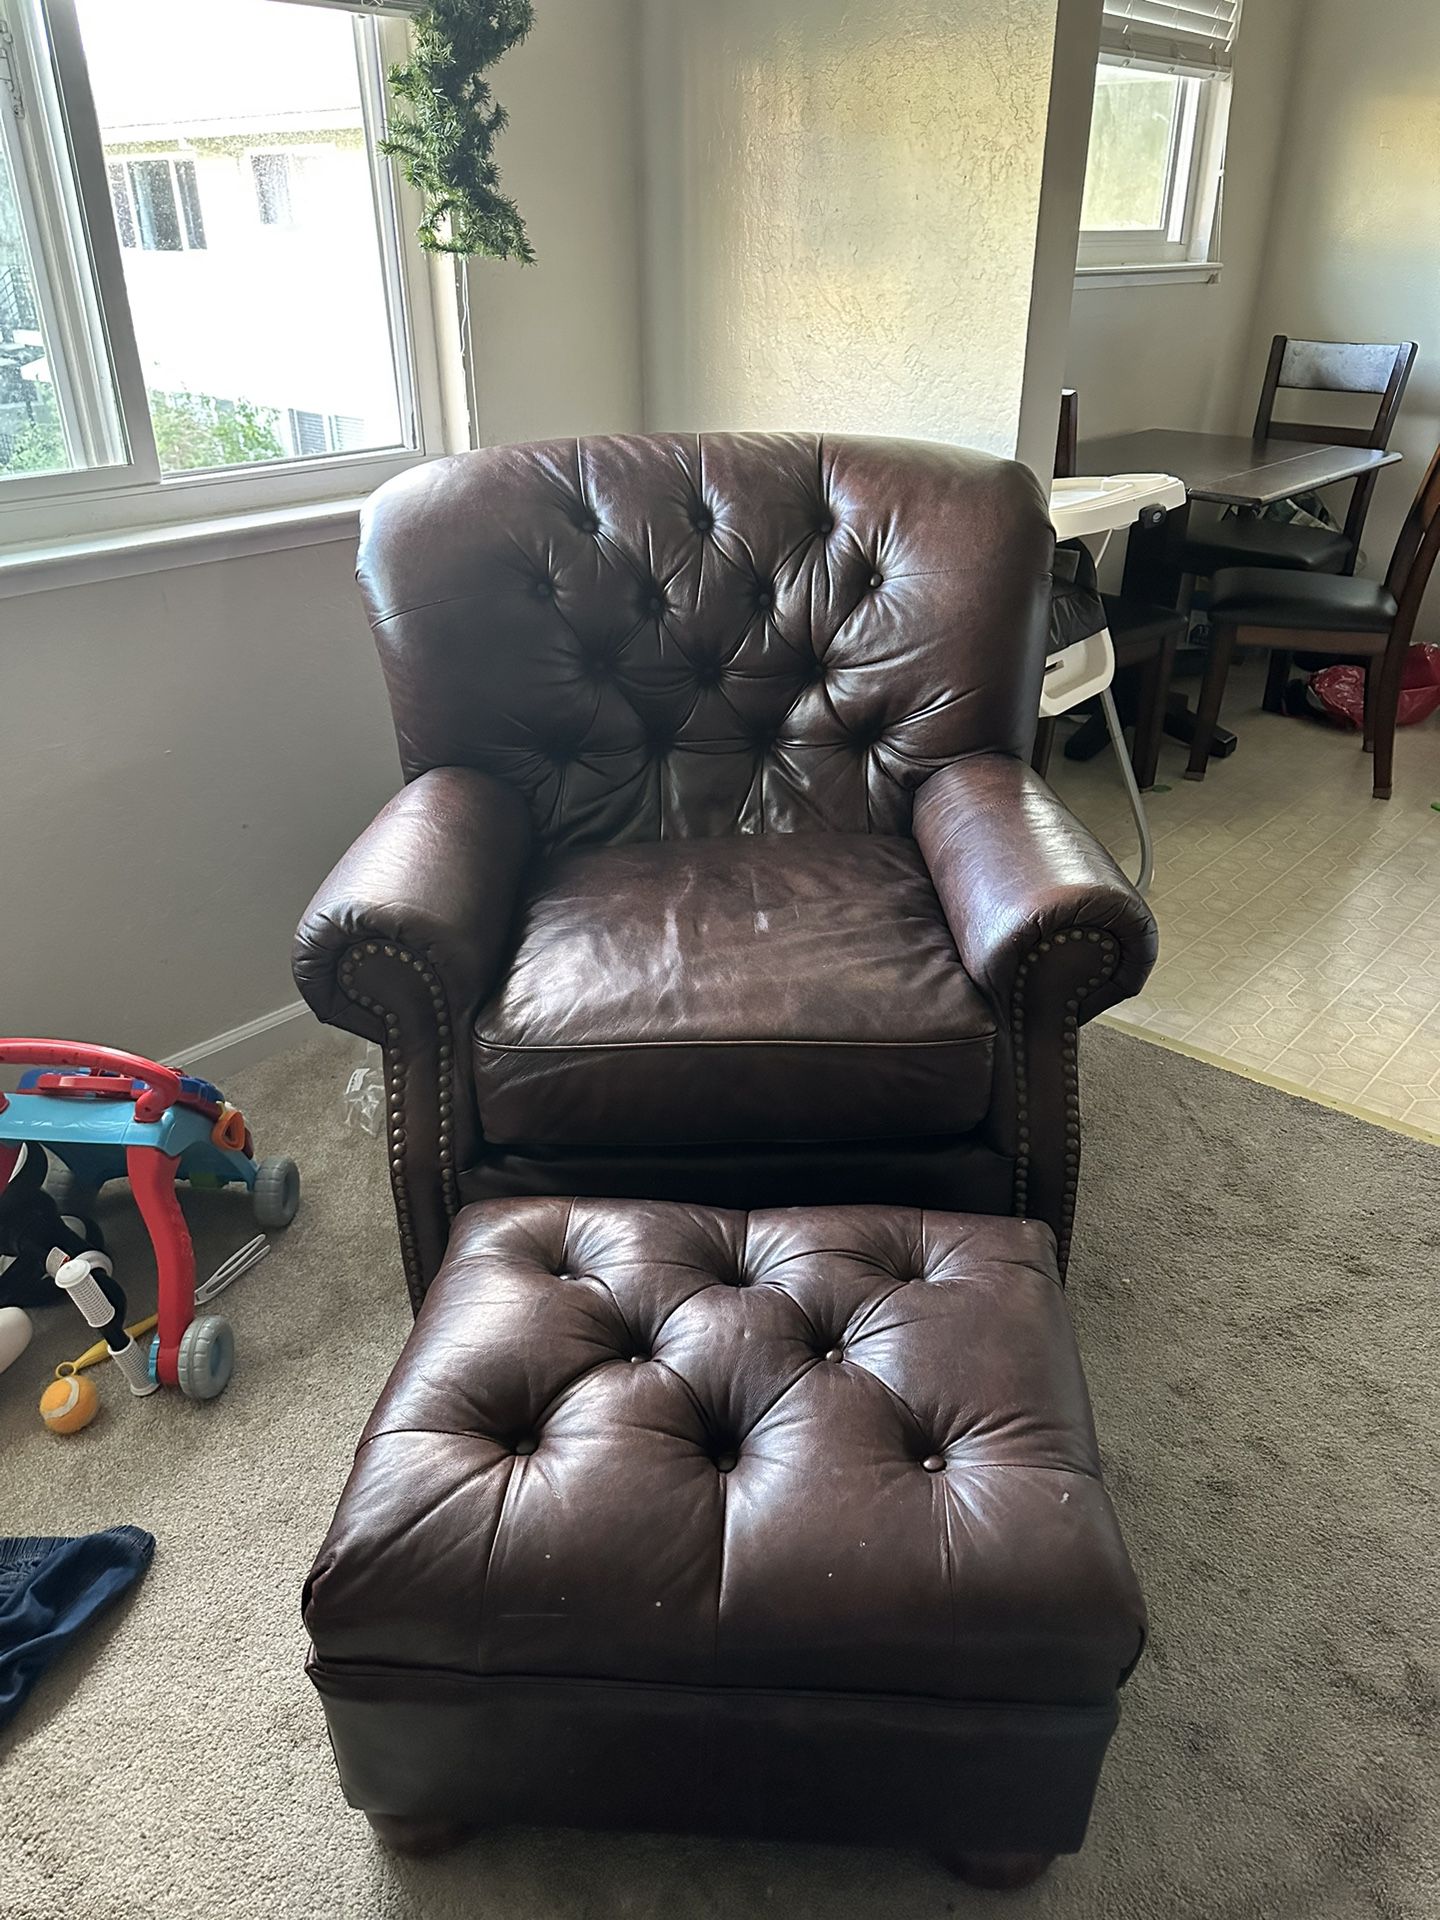 Leather Chair w/ Ottoman $100 OBO